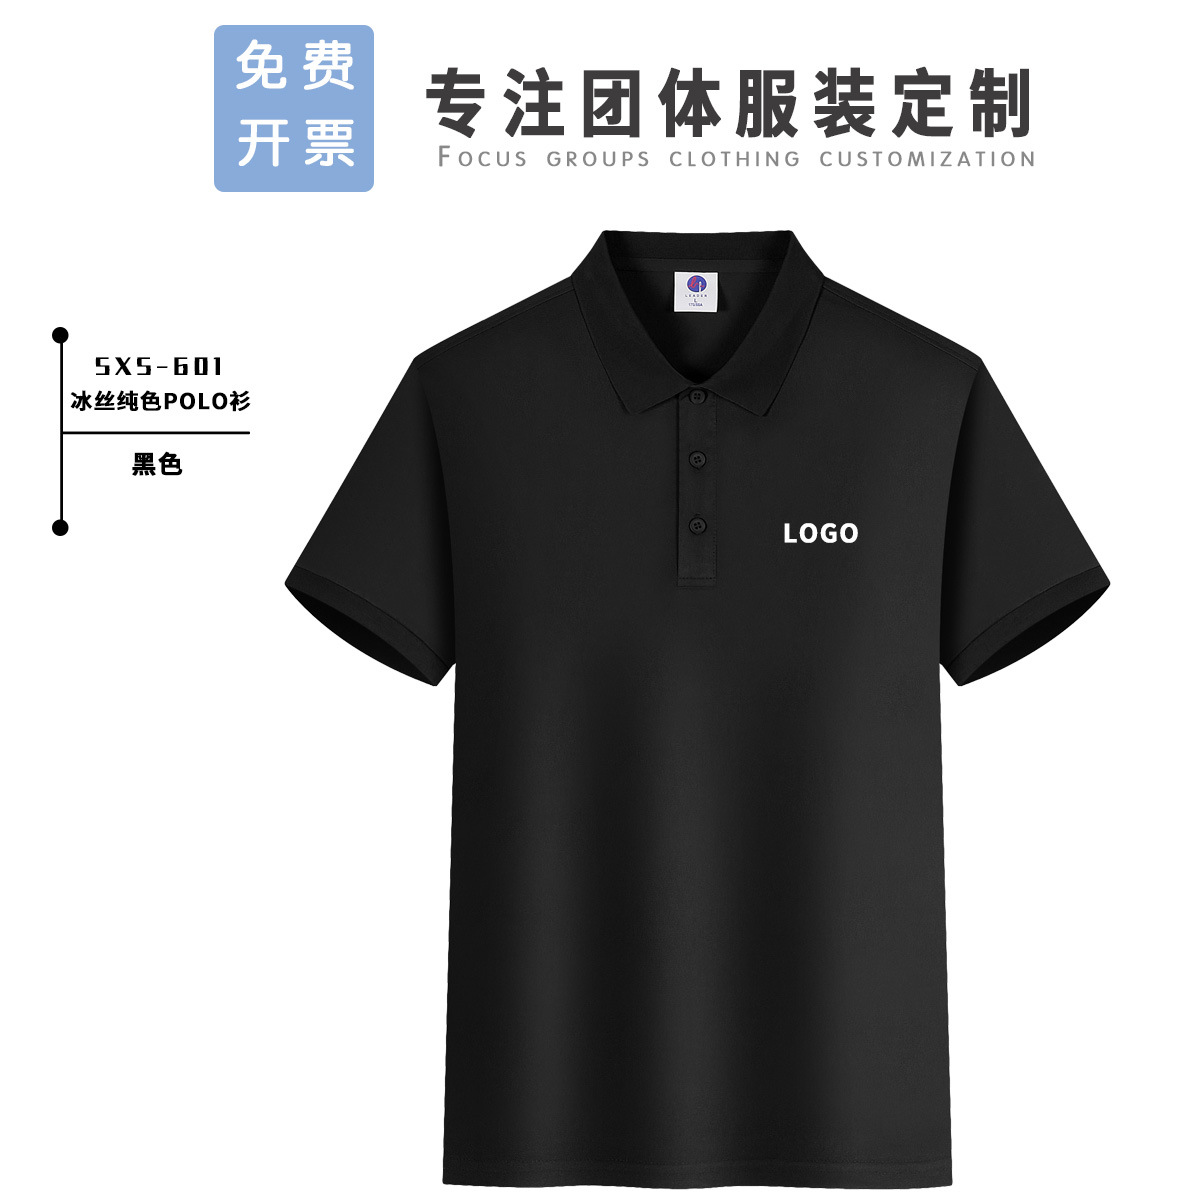 Summer Work Clothes Polo Shirt Printed Logo Short-Sleeved T-shirt Ice Silk Advertising Culture Group Staff Wear Embroidery